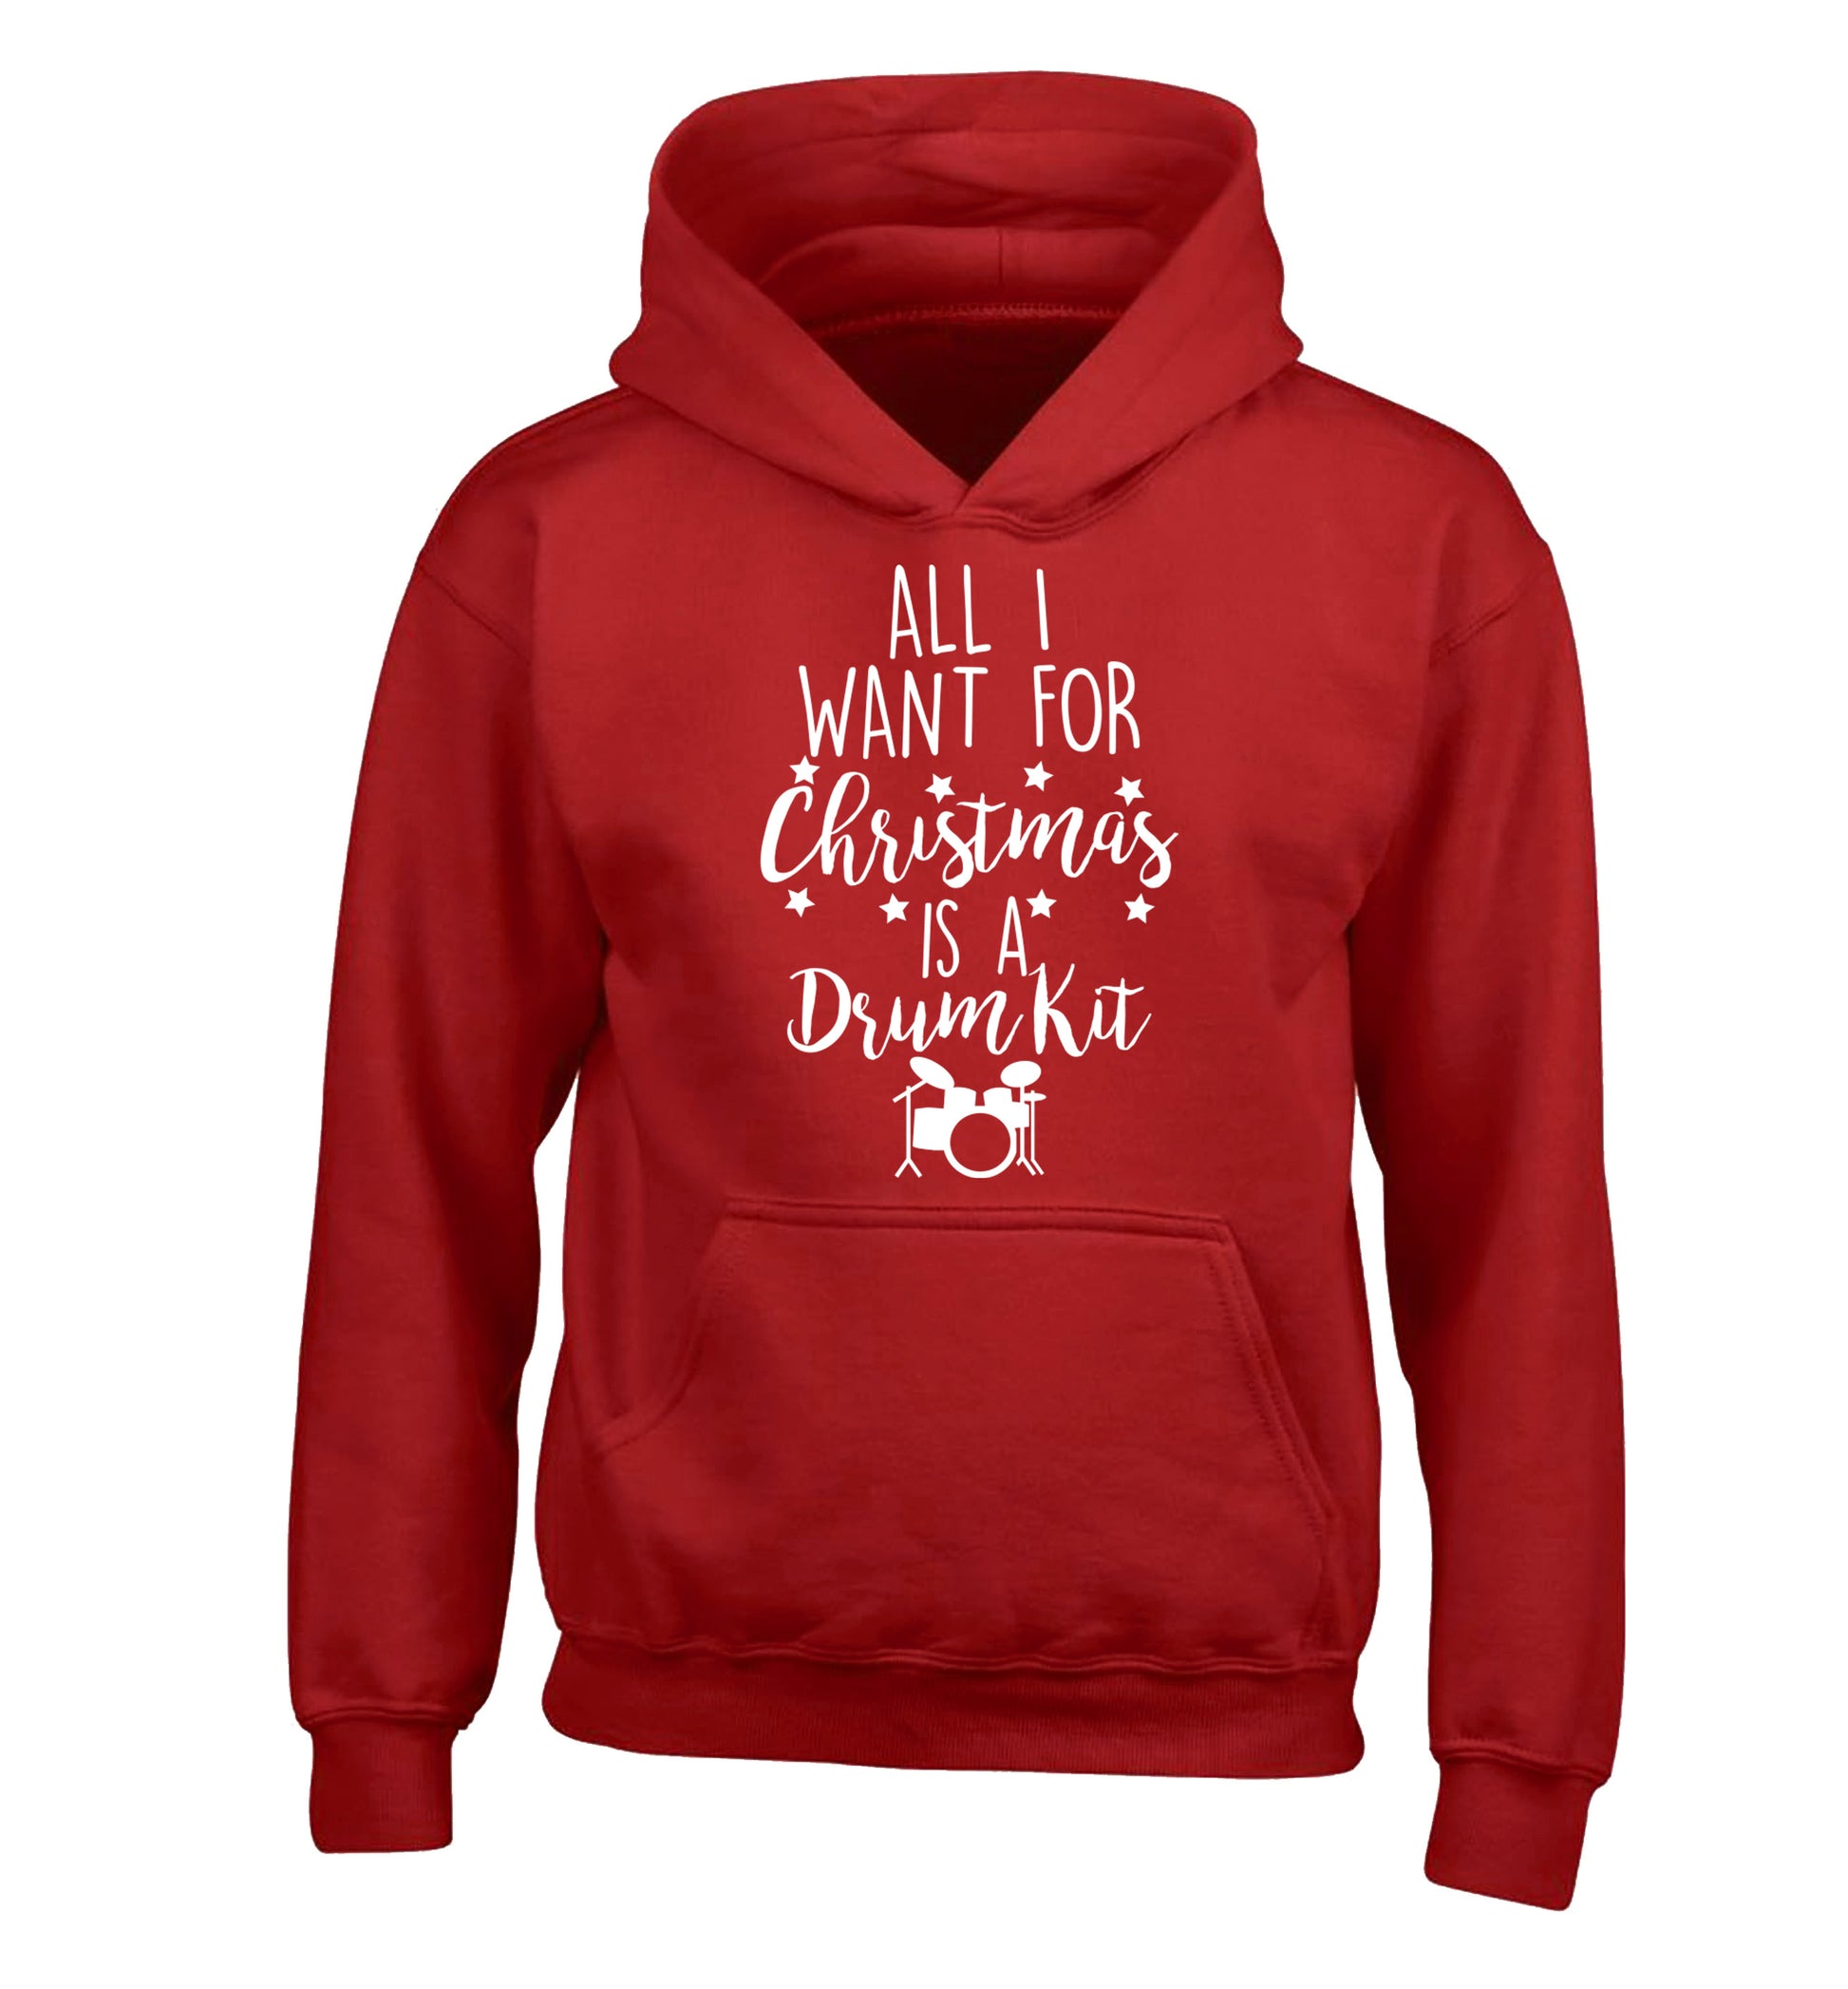 All I want for Christmas is a drum kit! children's red hoodie 12-14 Years